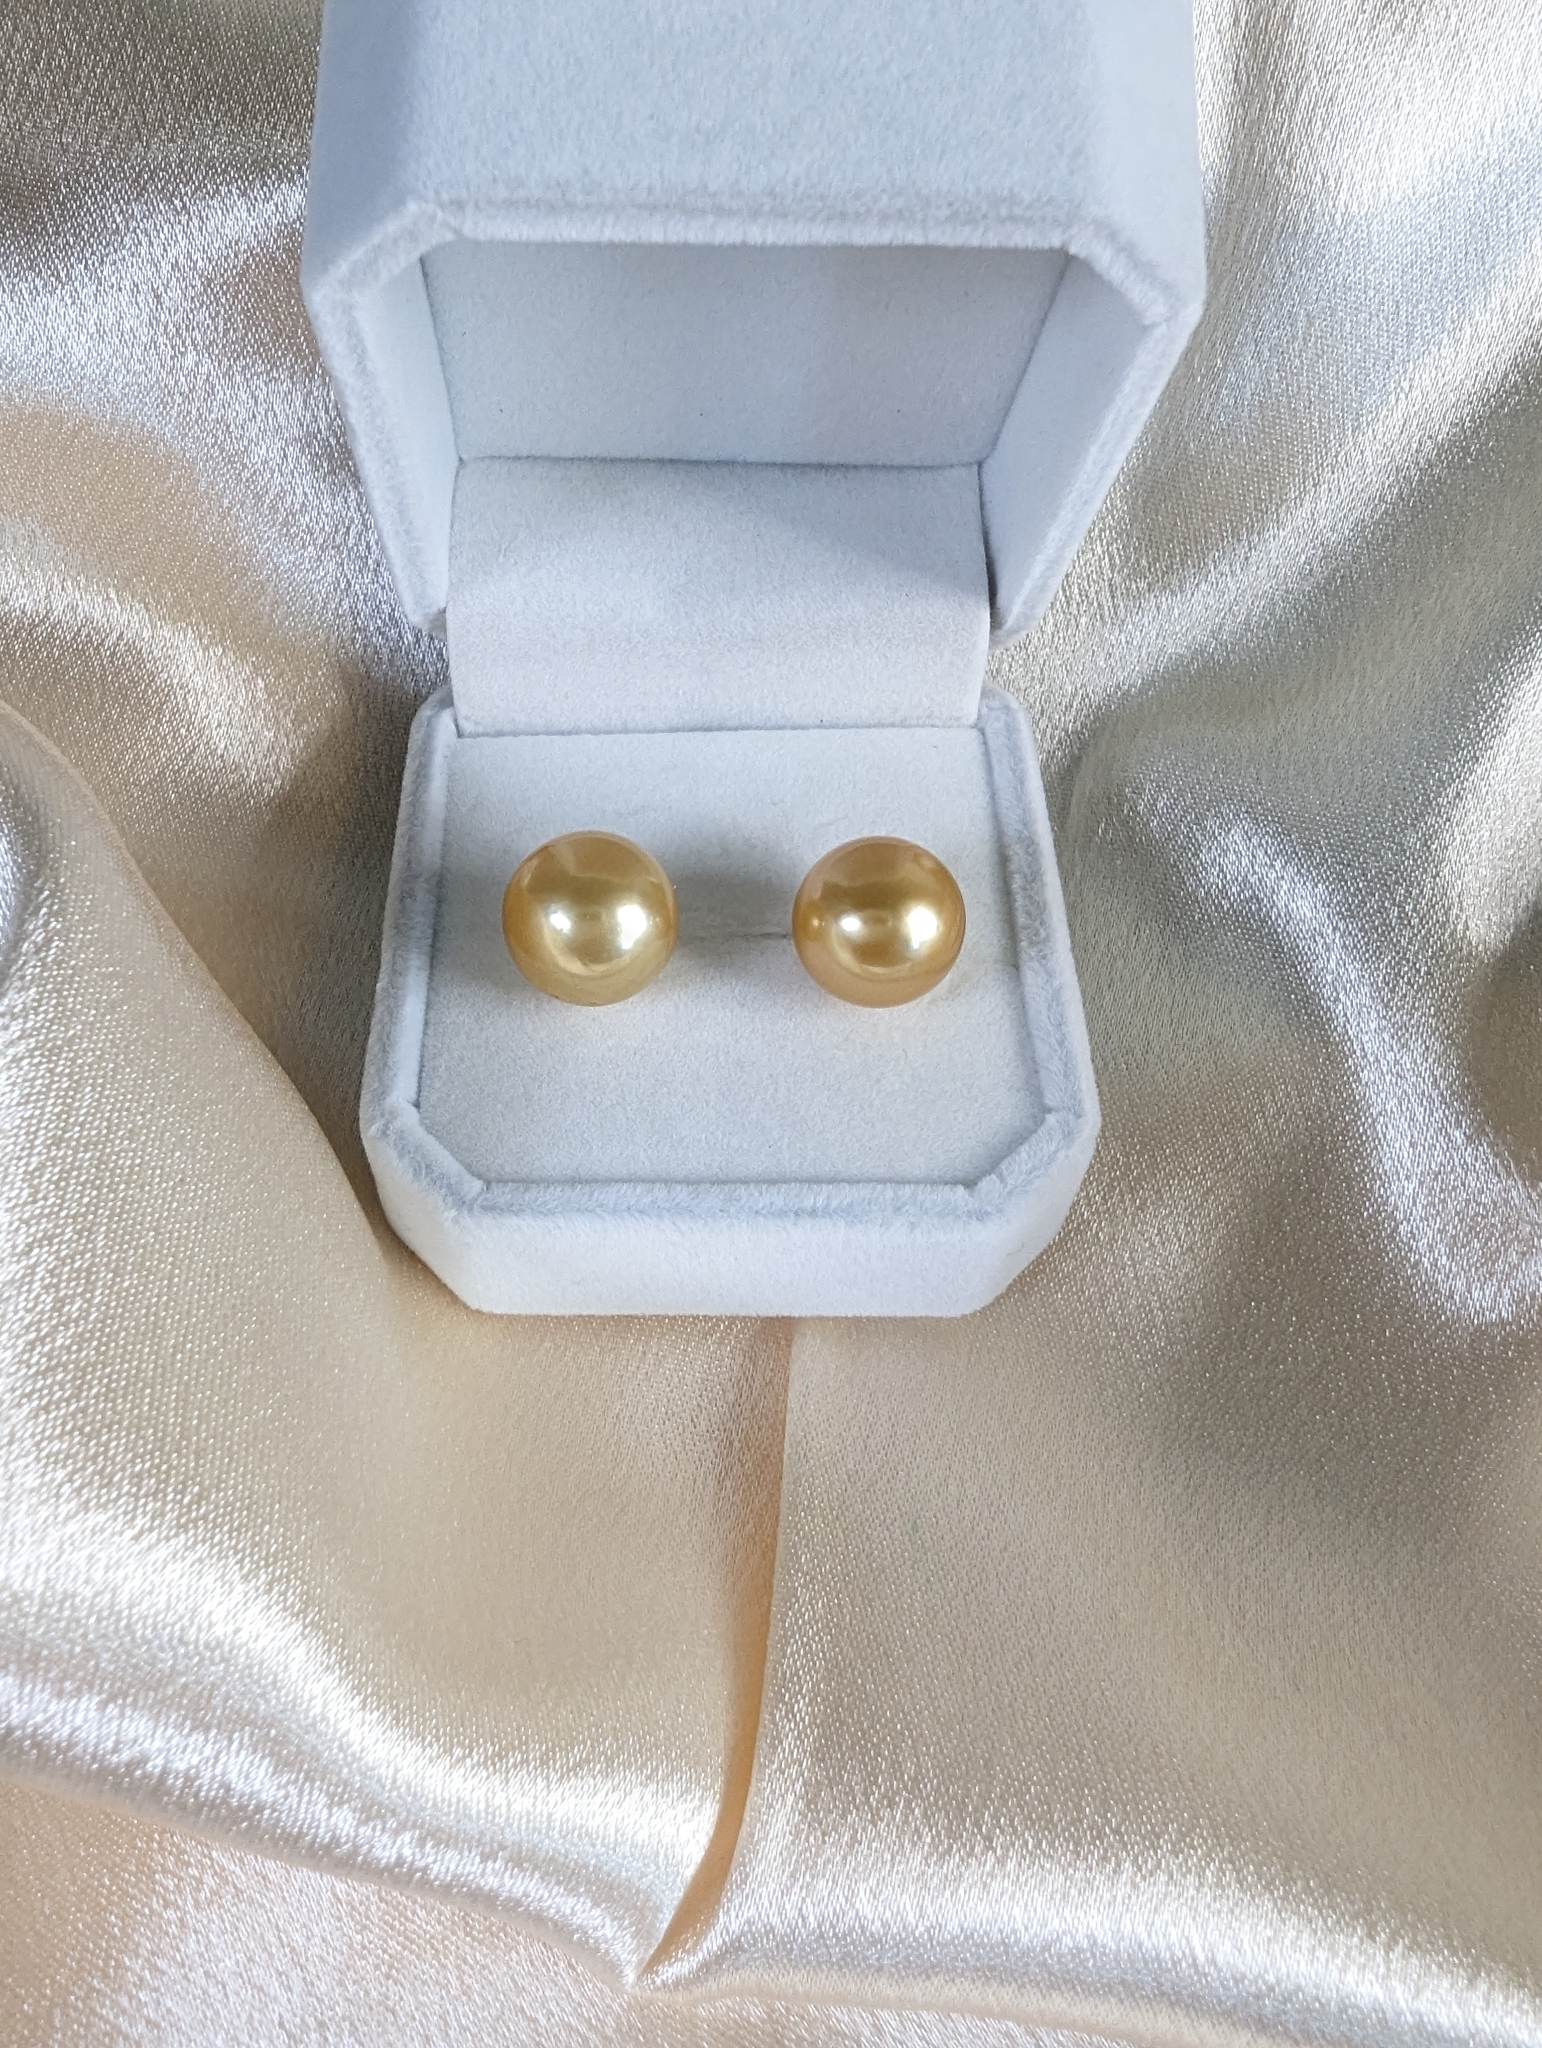 South Sea Pearl 12 mm size Stud Earrings in 14 karat solid gold settings with lifters